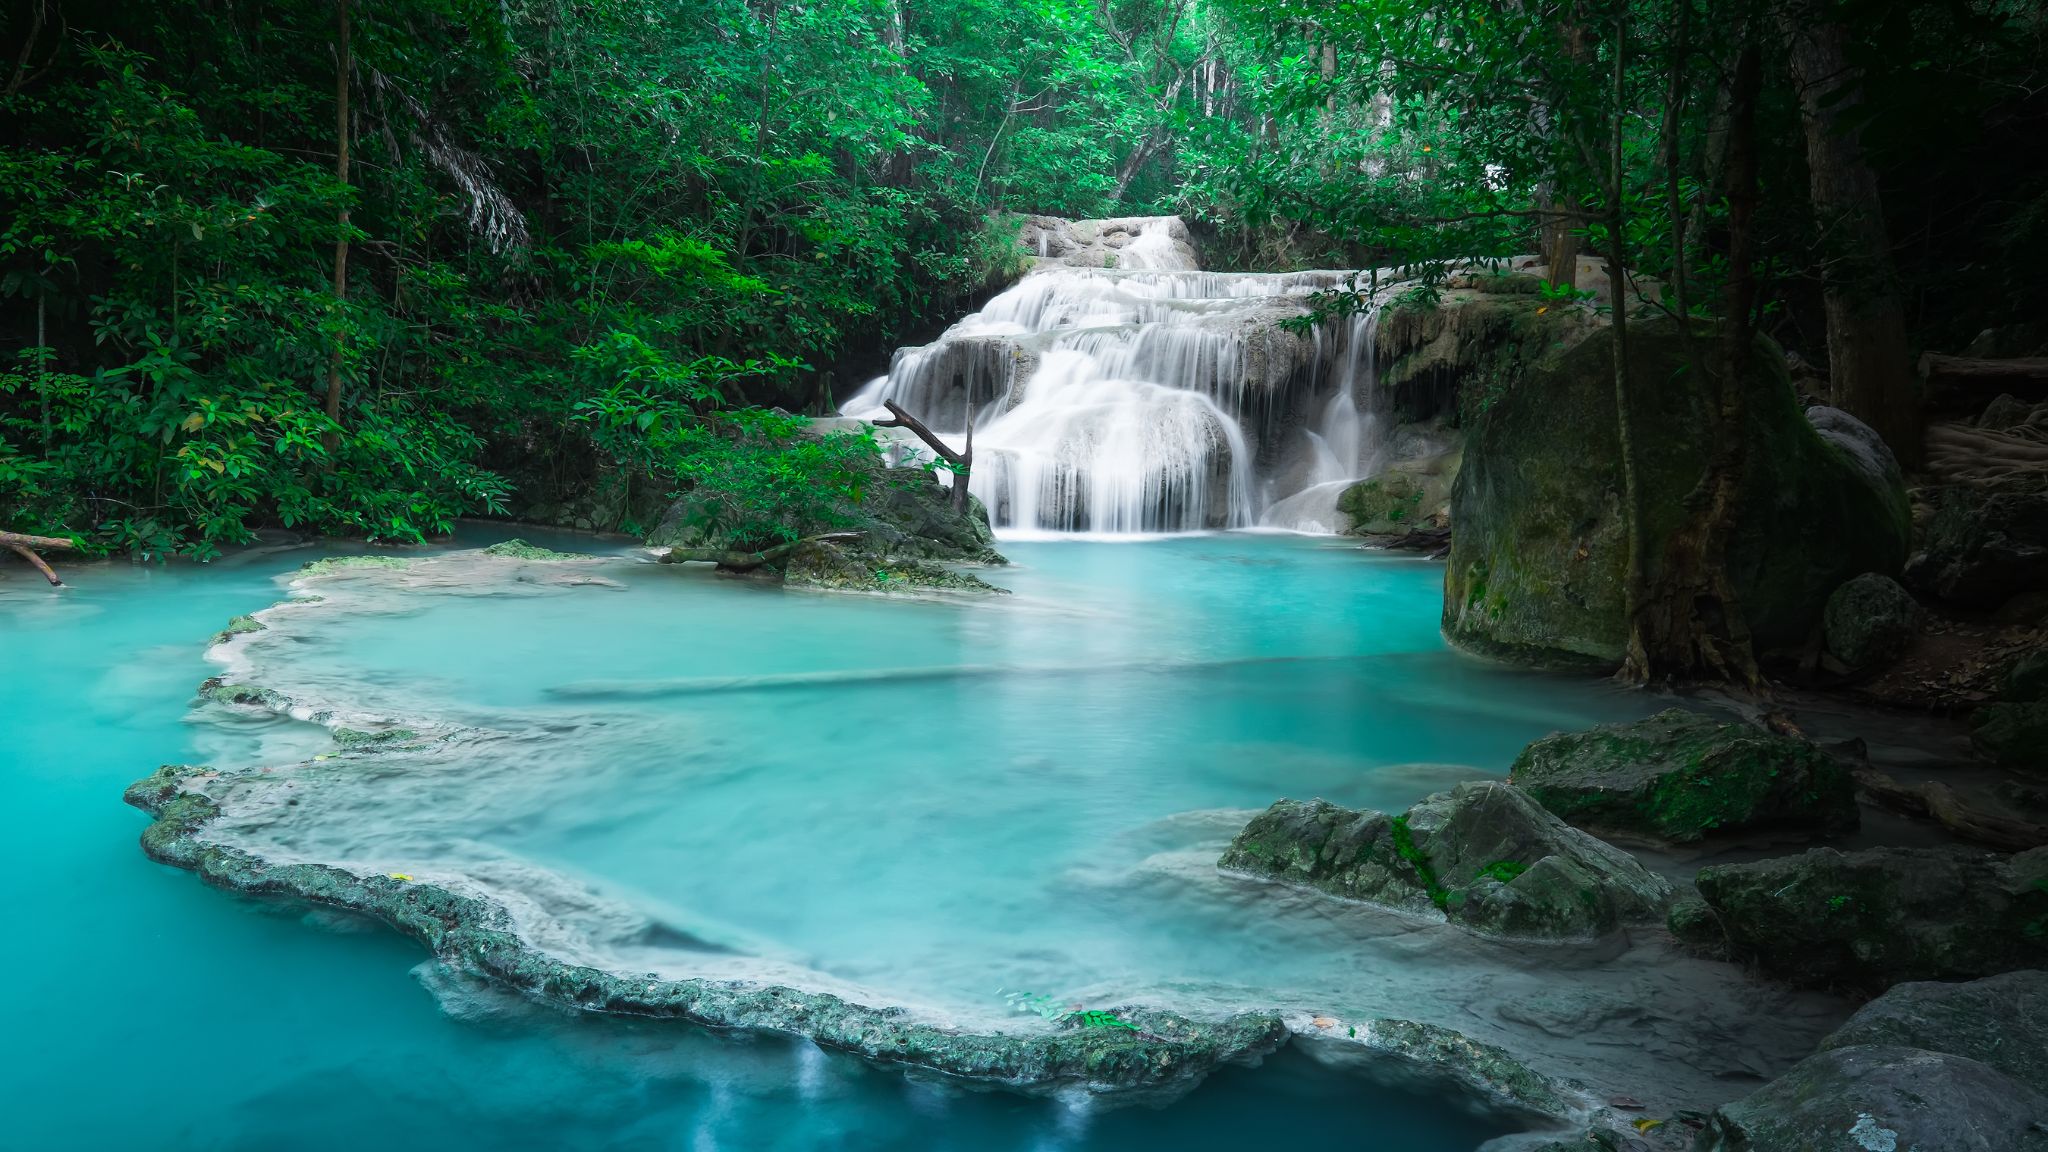 Day 4 Immerse Yourself In The Stunning Scenery Of Erawan Waterfall